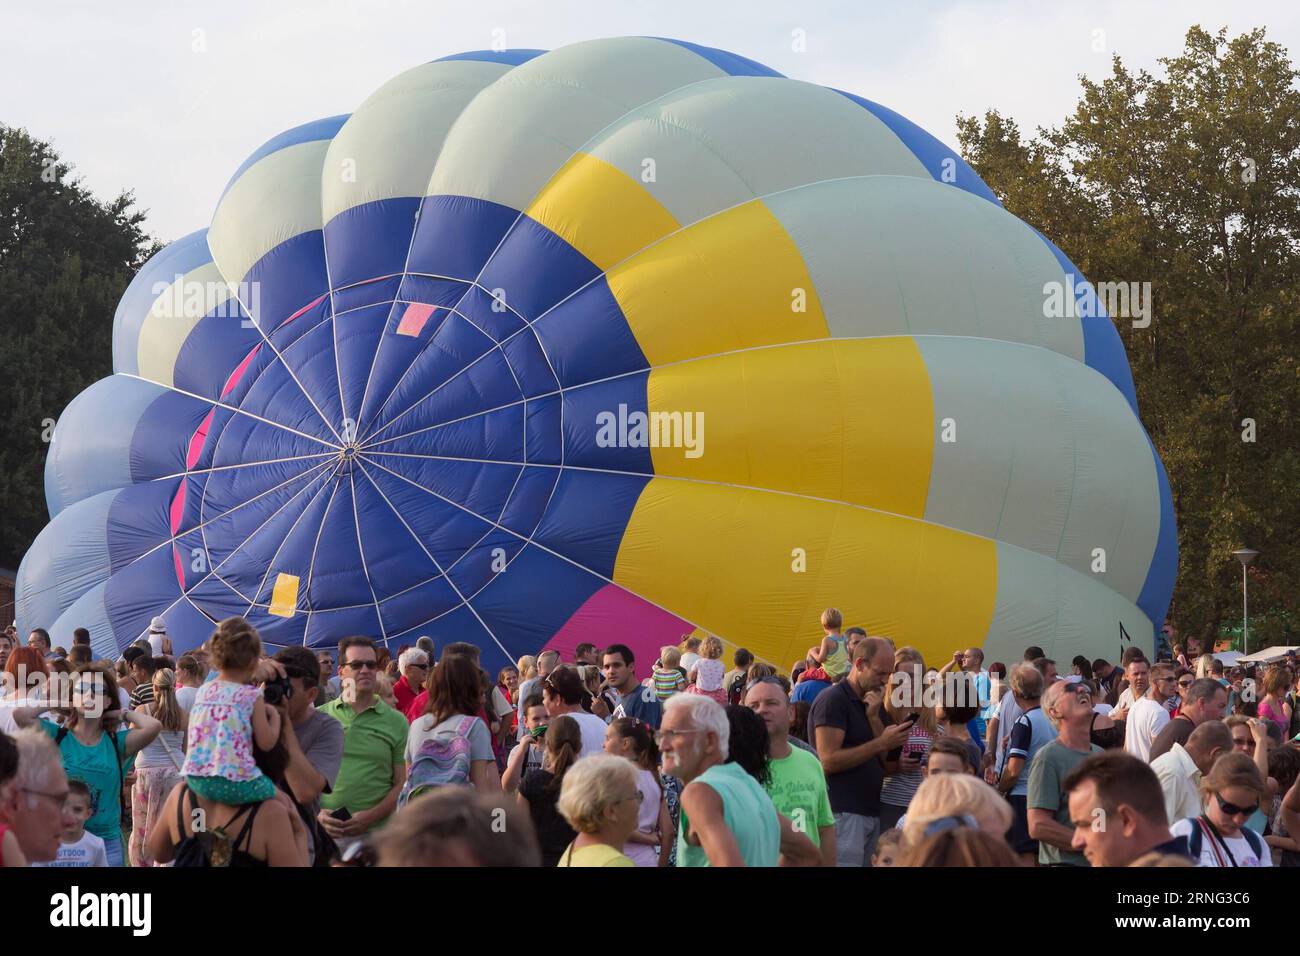 People visit the 22nd Lake Velence International Hot Air Balloon Carnival in Agard, Fejer, Hungary, Sept. 3, 2016. ) (cyc) HUNGARY-AGARD-HOT AIR BALLOON-CARNIVAL AttilaxVolgy PUBLICATIONxNOTxINxCHN   Celebrities Visit The 22nd Lake Velence International Hot Air Balloon Carnival in Agard Fejer Hungary Sept 3 2016 cyc Hungary Agard Hot Air Balloon Carnival AttilaxVolgy PUBLICATIONxNOTxINxCHN Stock Photo